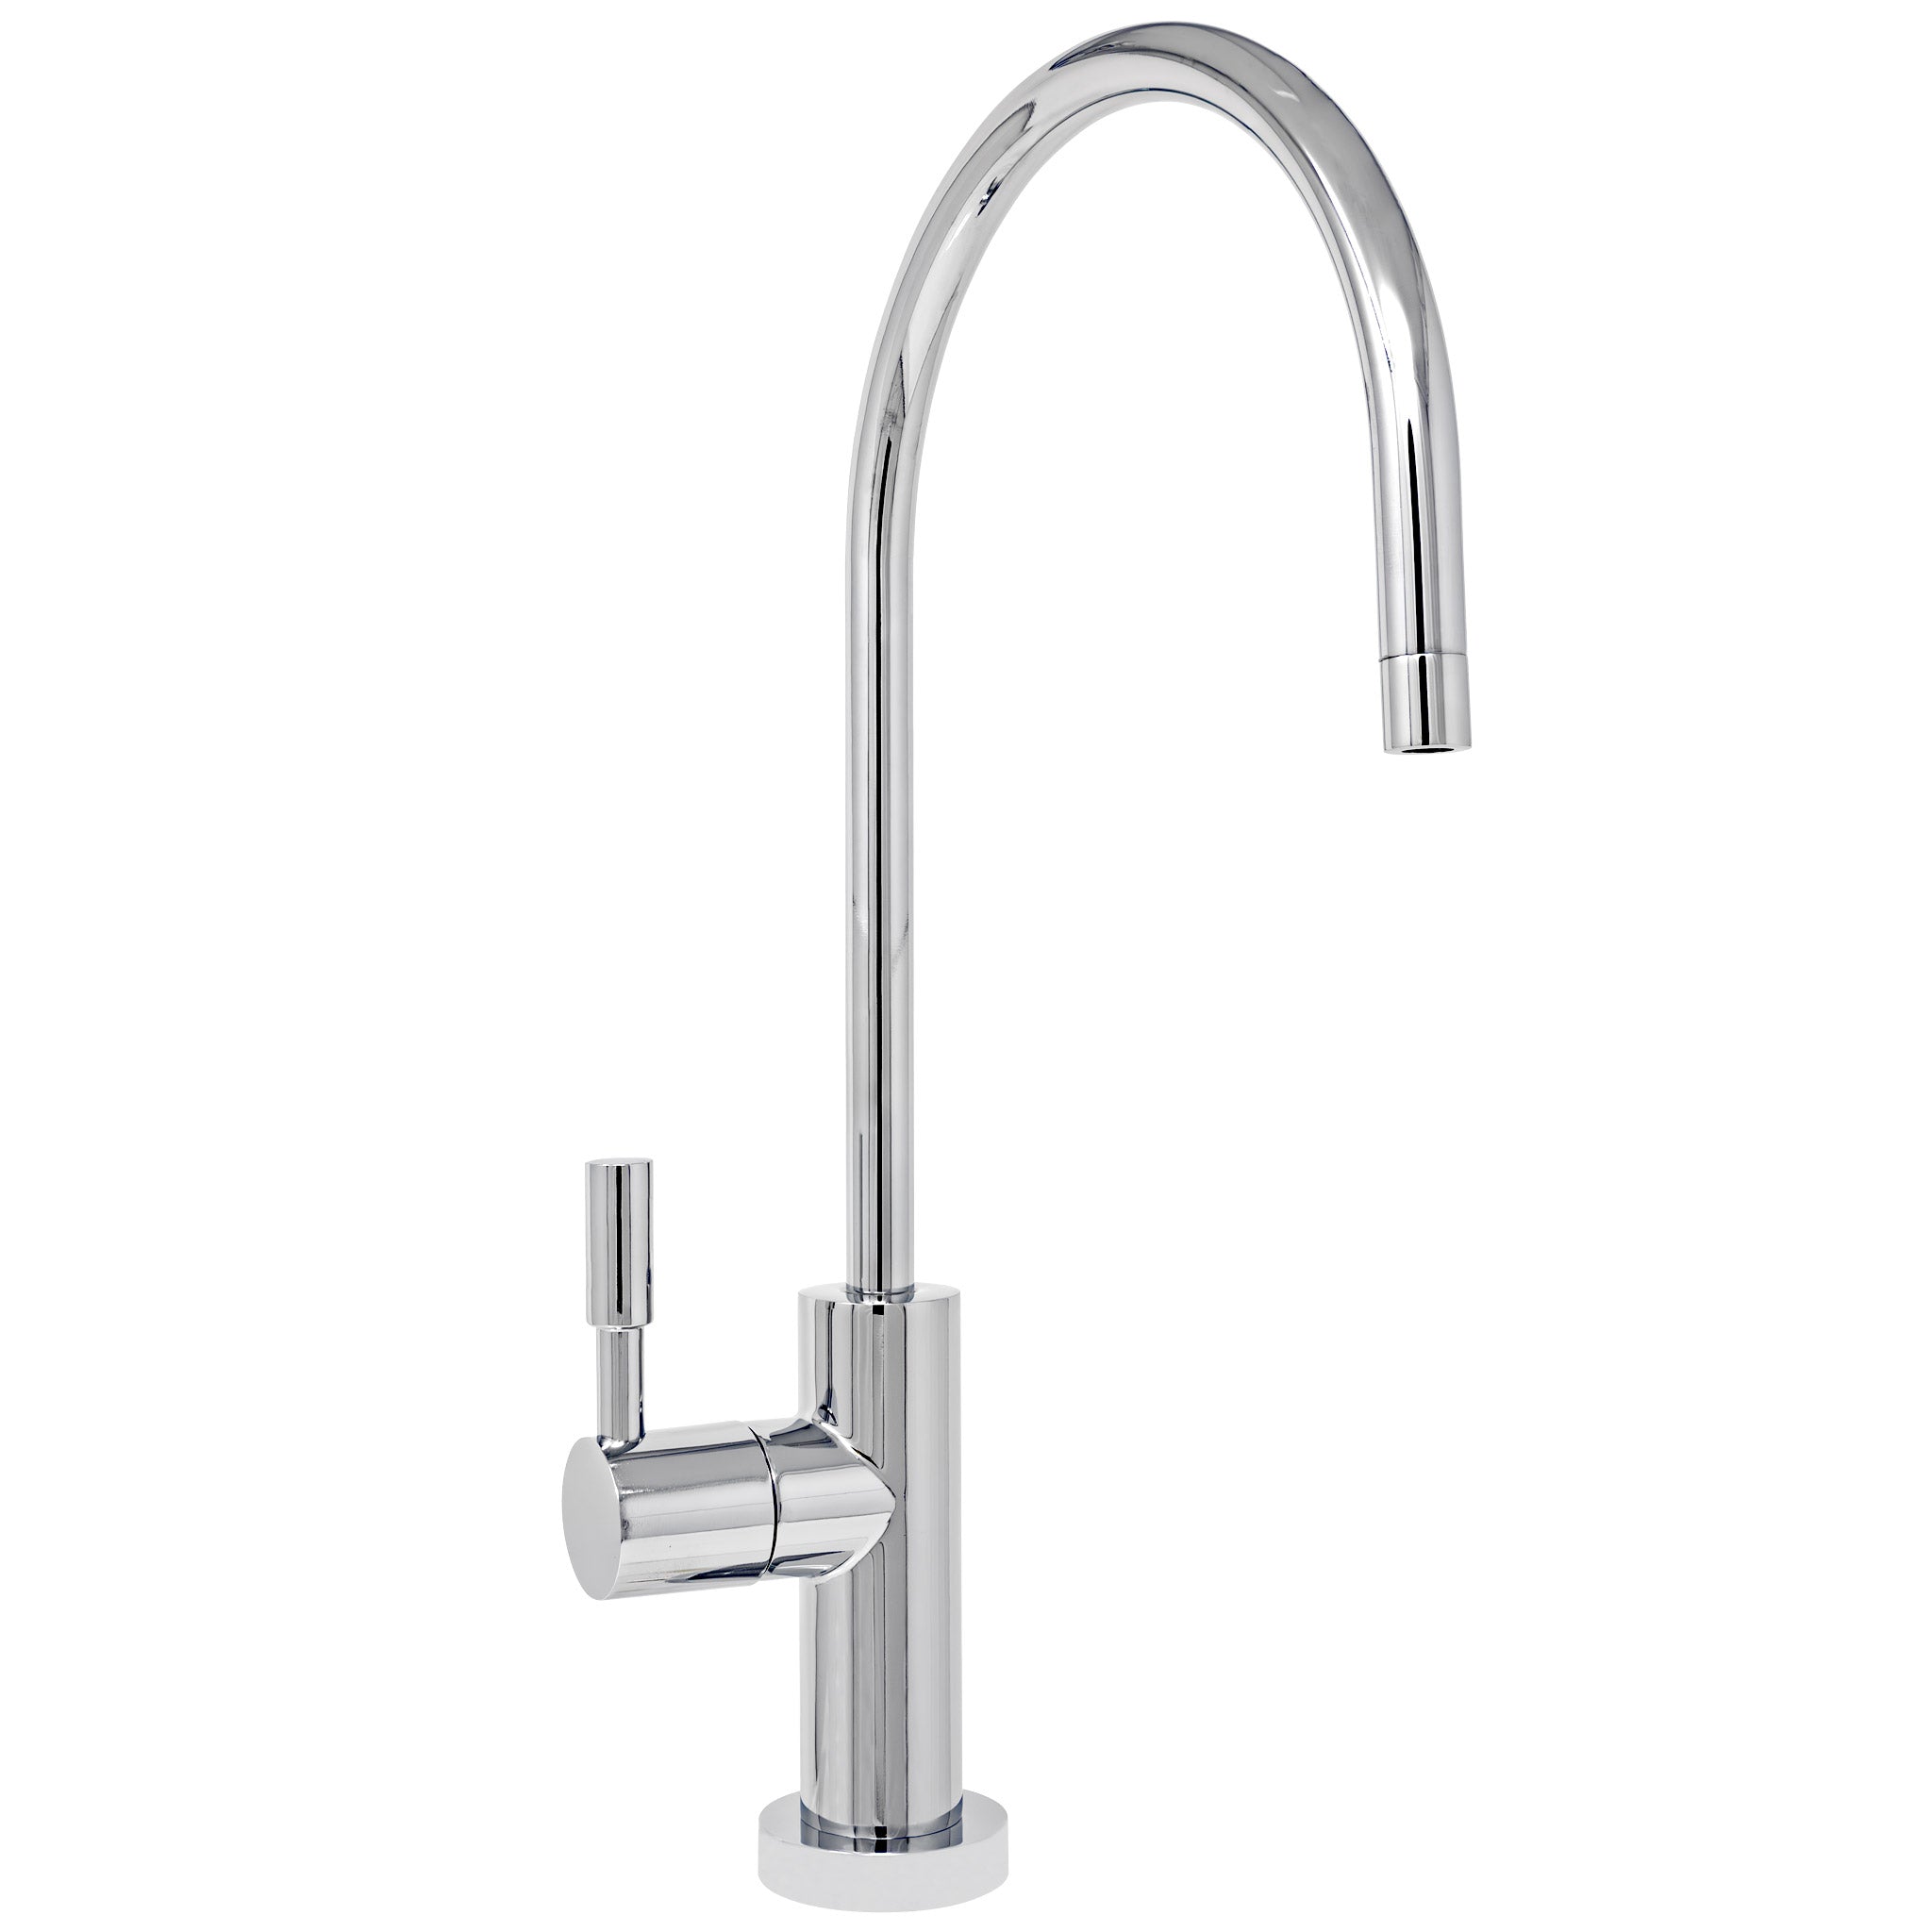 Water Filtration Faucet Chrome Large Euro Style Reverse Osmosis Non Air Gap. Certified by NSF